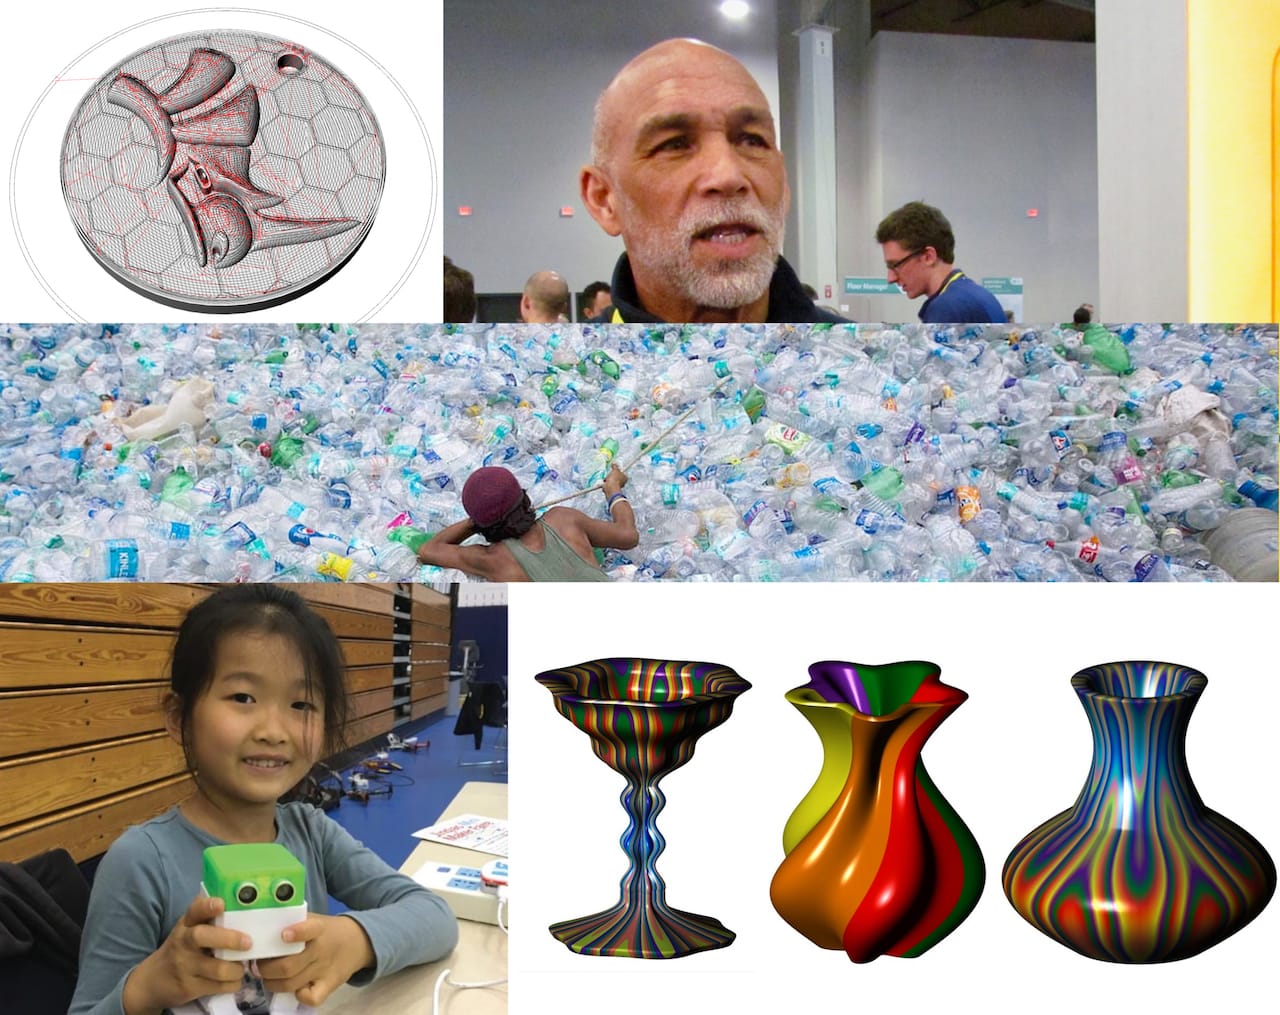  Some of the worthy 3D printing projects we've supported in the past 